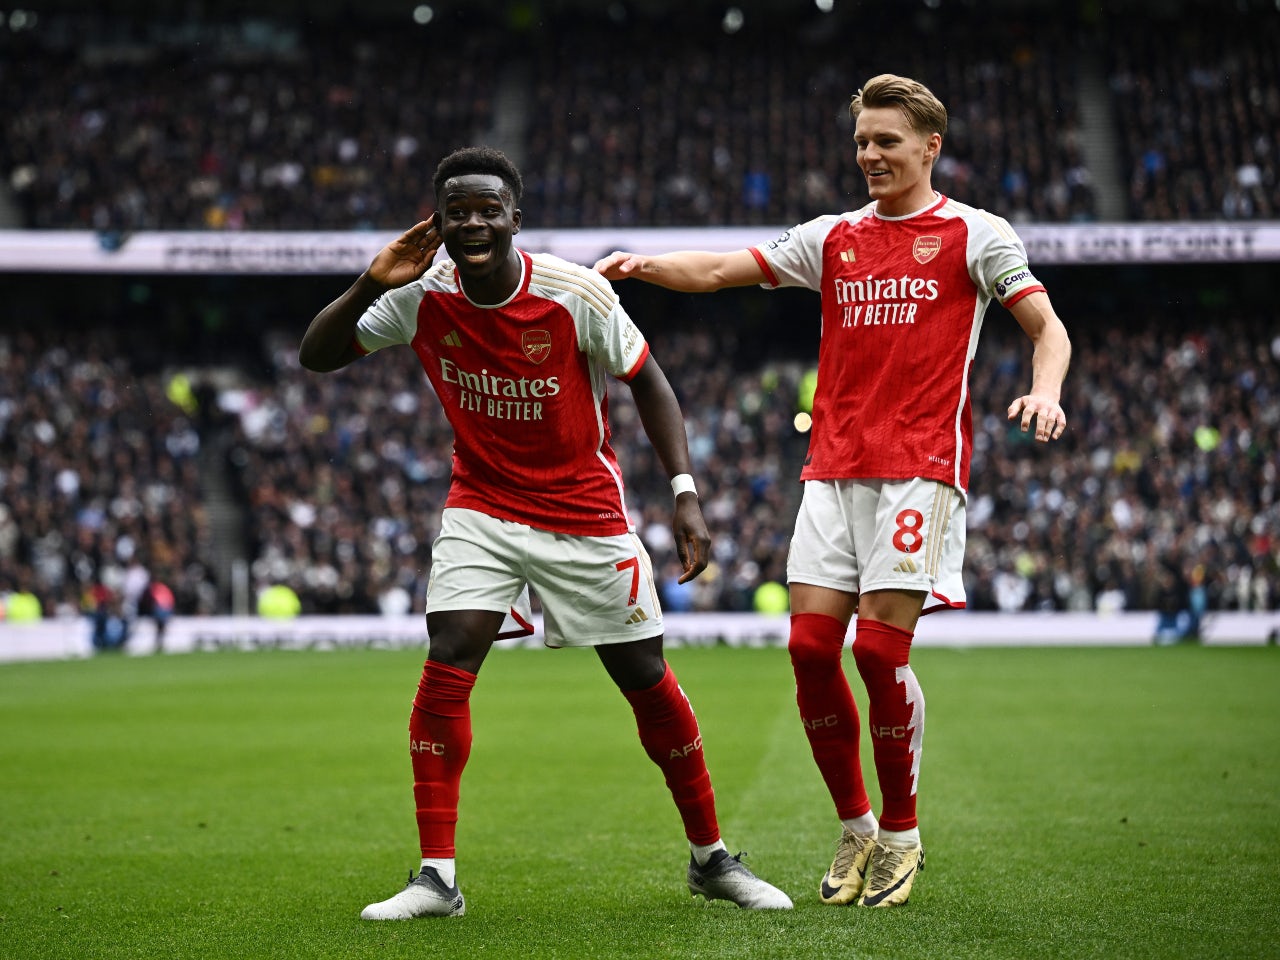 Arsenal survive Tottenham Hotspur fightback in chaotic North London derby